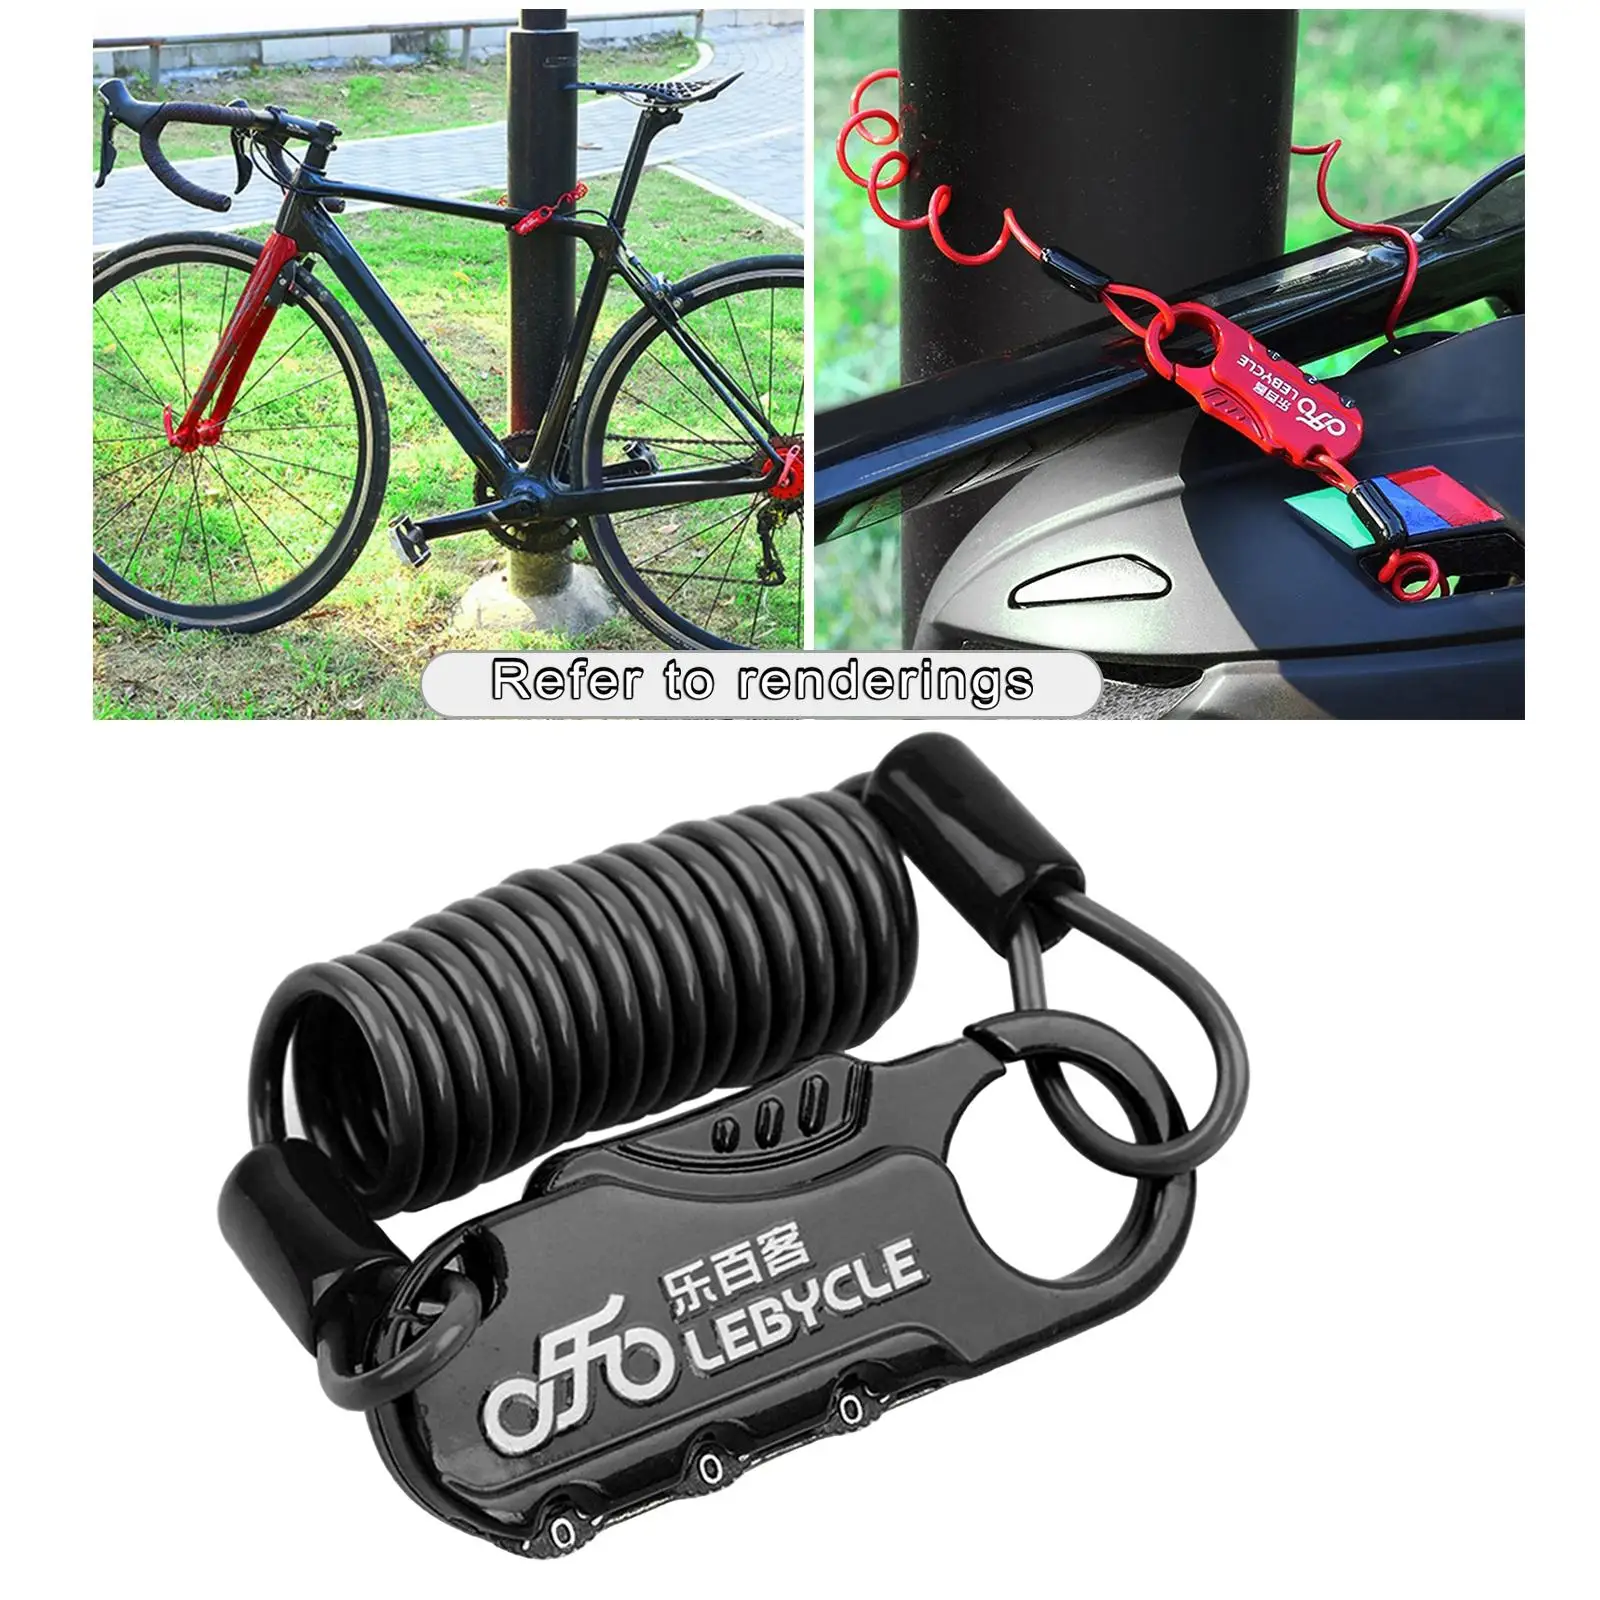 Portable Helmet Cable Lock Digit Password Locks for Bicycle E-bike Luggage